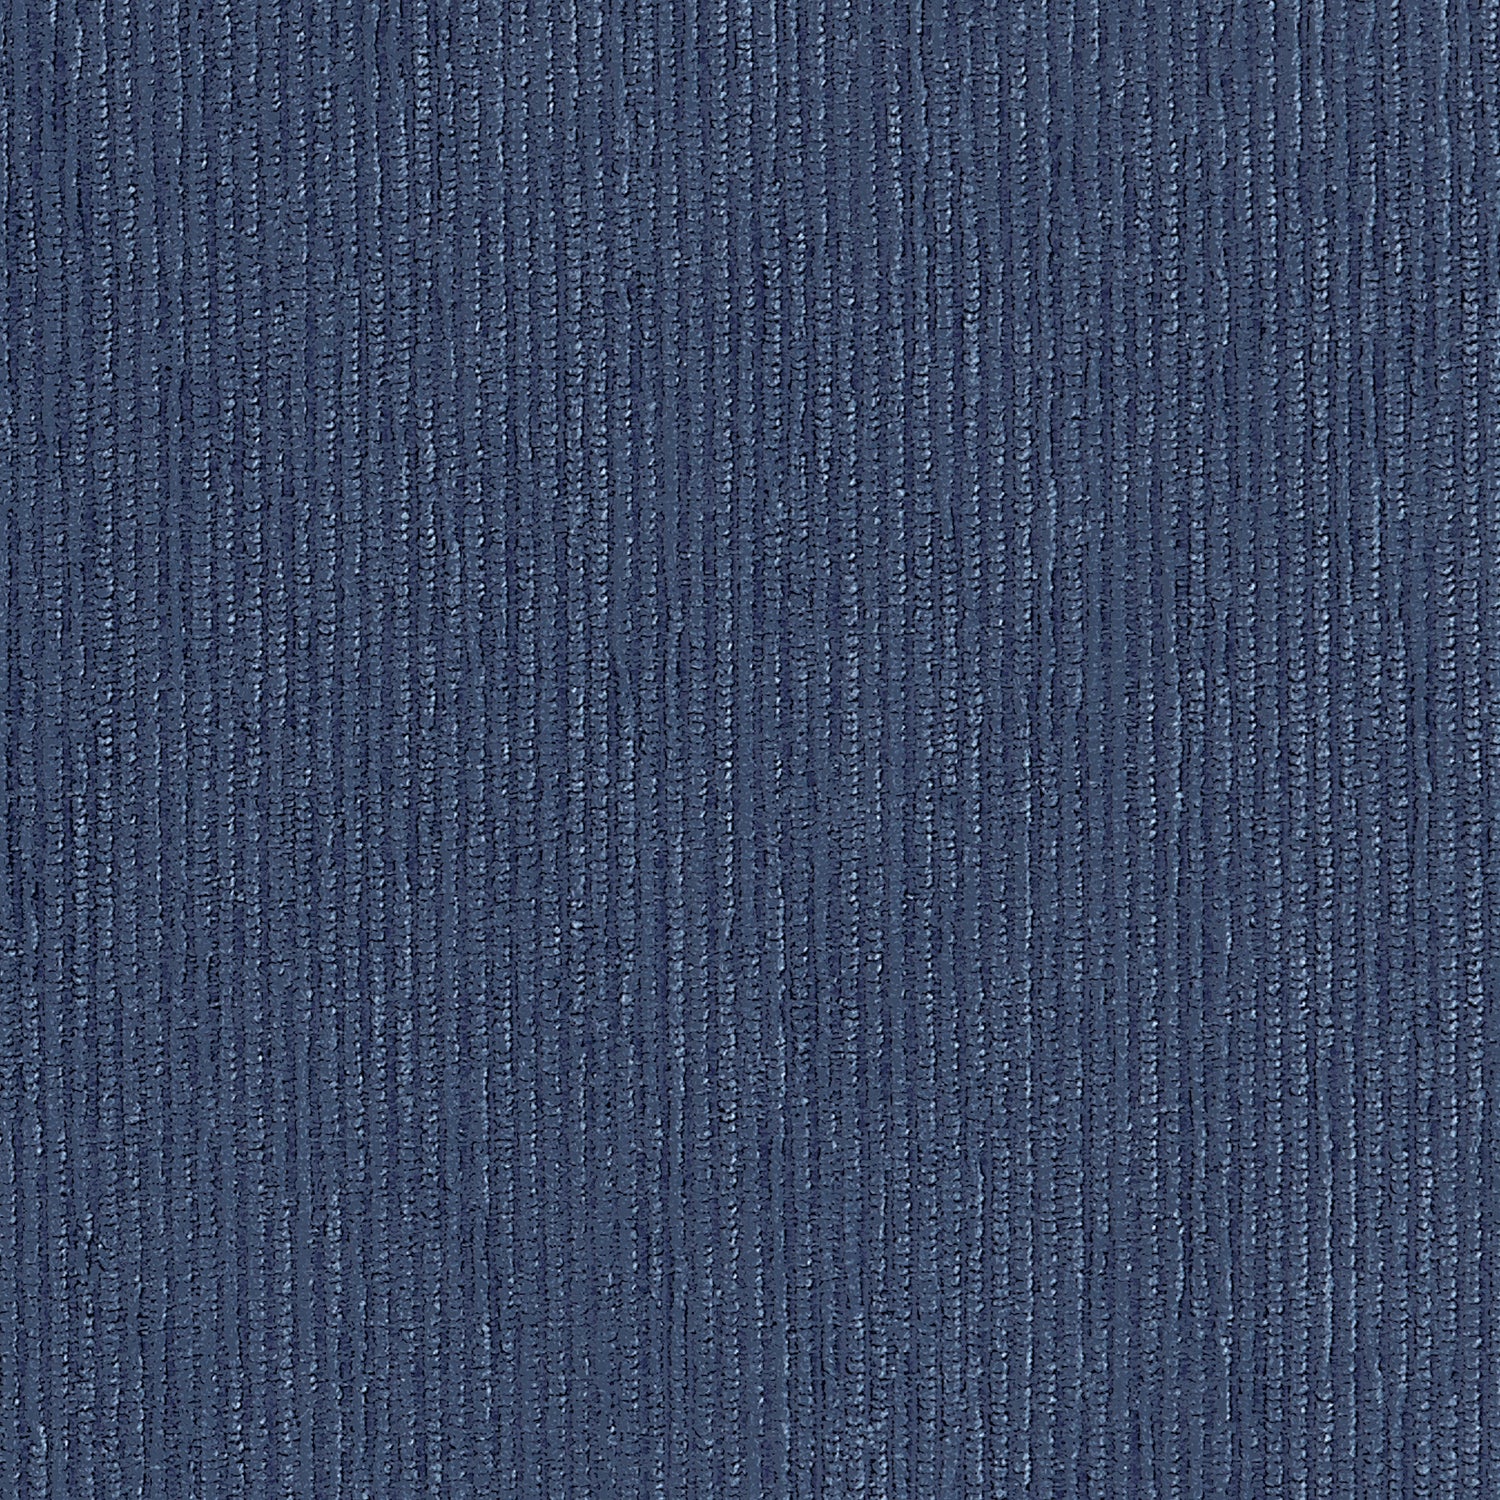 Mirage fabric in navy color - pattern number W80250 - by Thibaut in the Kaleidoscope Fabrics collection